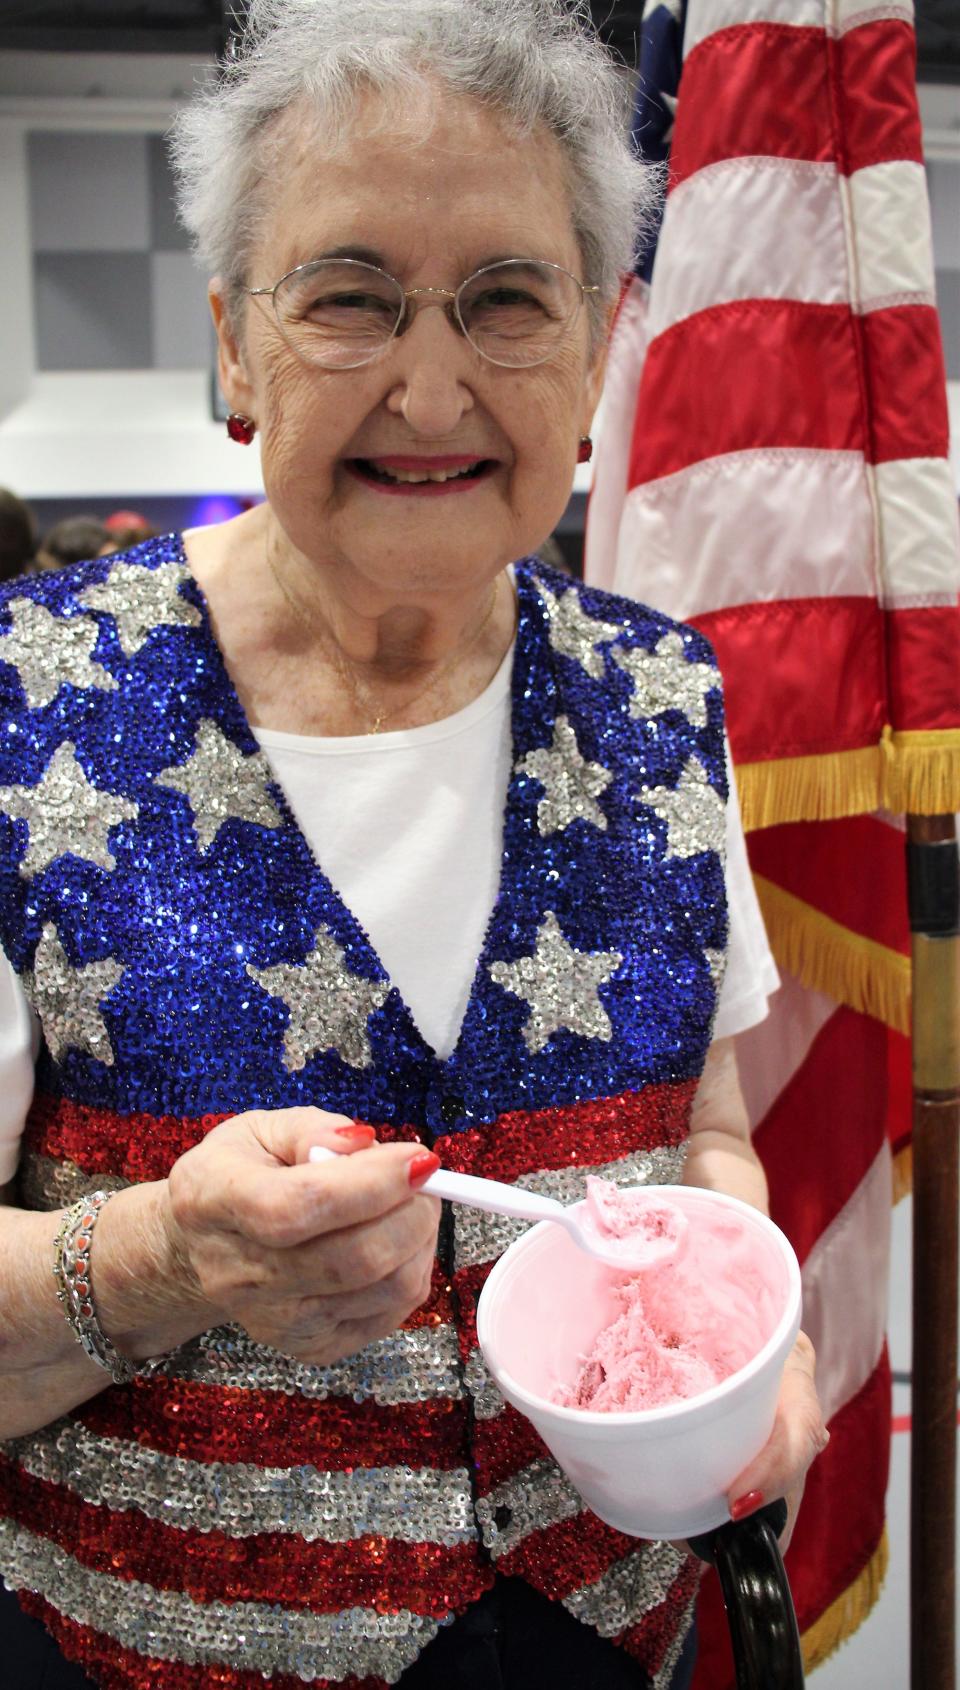 Betty Hale celebrated her birthday with ice cream on the Fourth of July. At Hillcrest Church of Christ, so did everyone else after Monday's neighborhood parade.